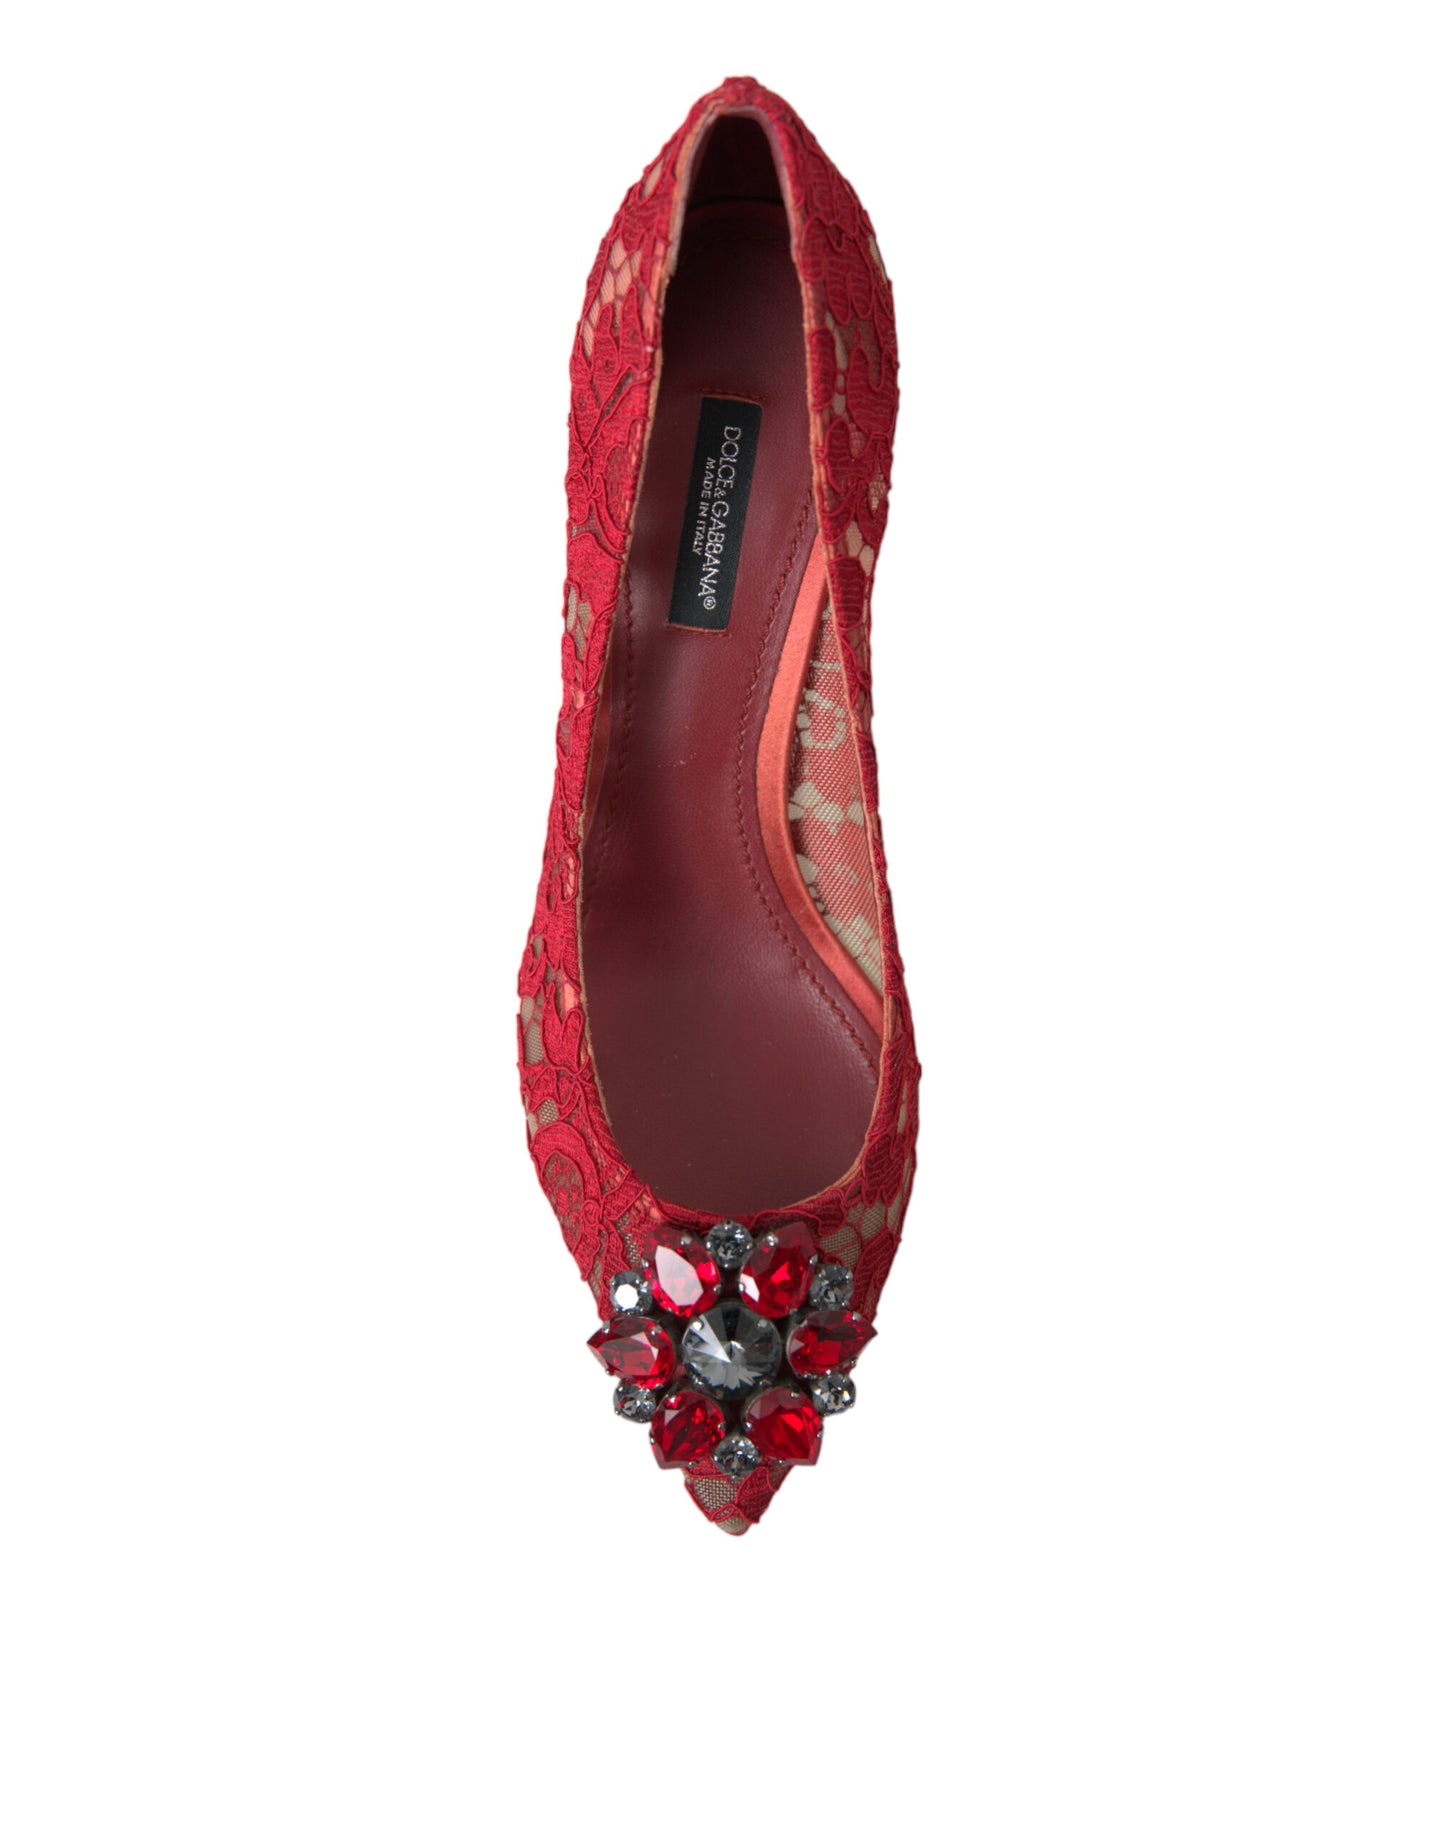 Radiant Red Lace Heels with Crystals